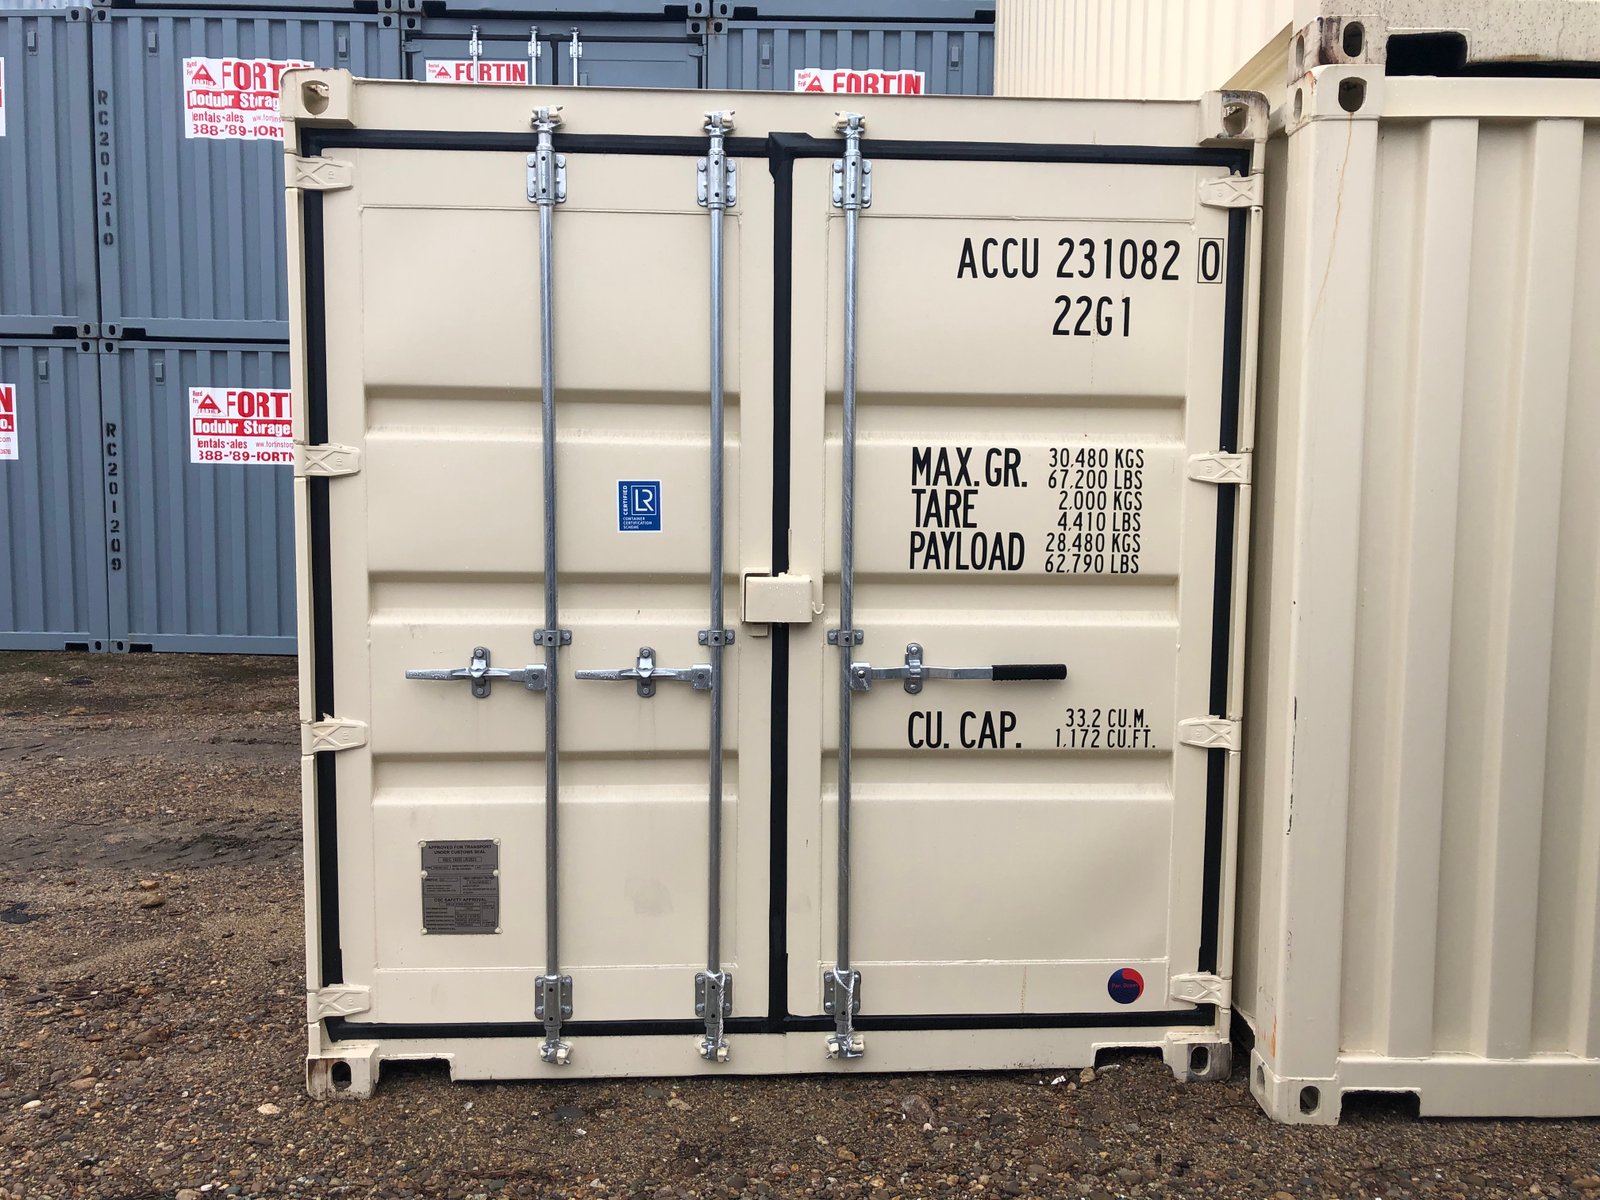 Container for sale